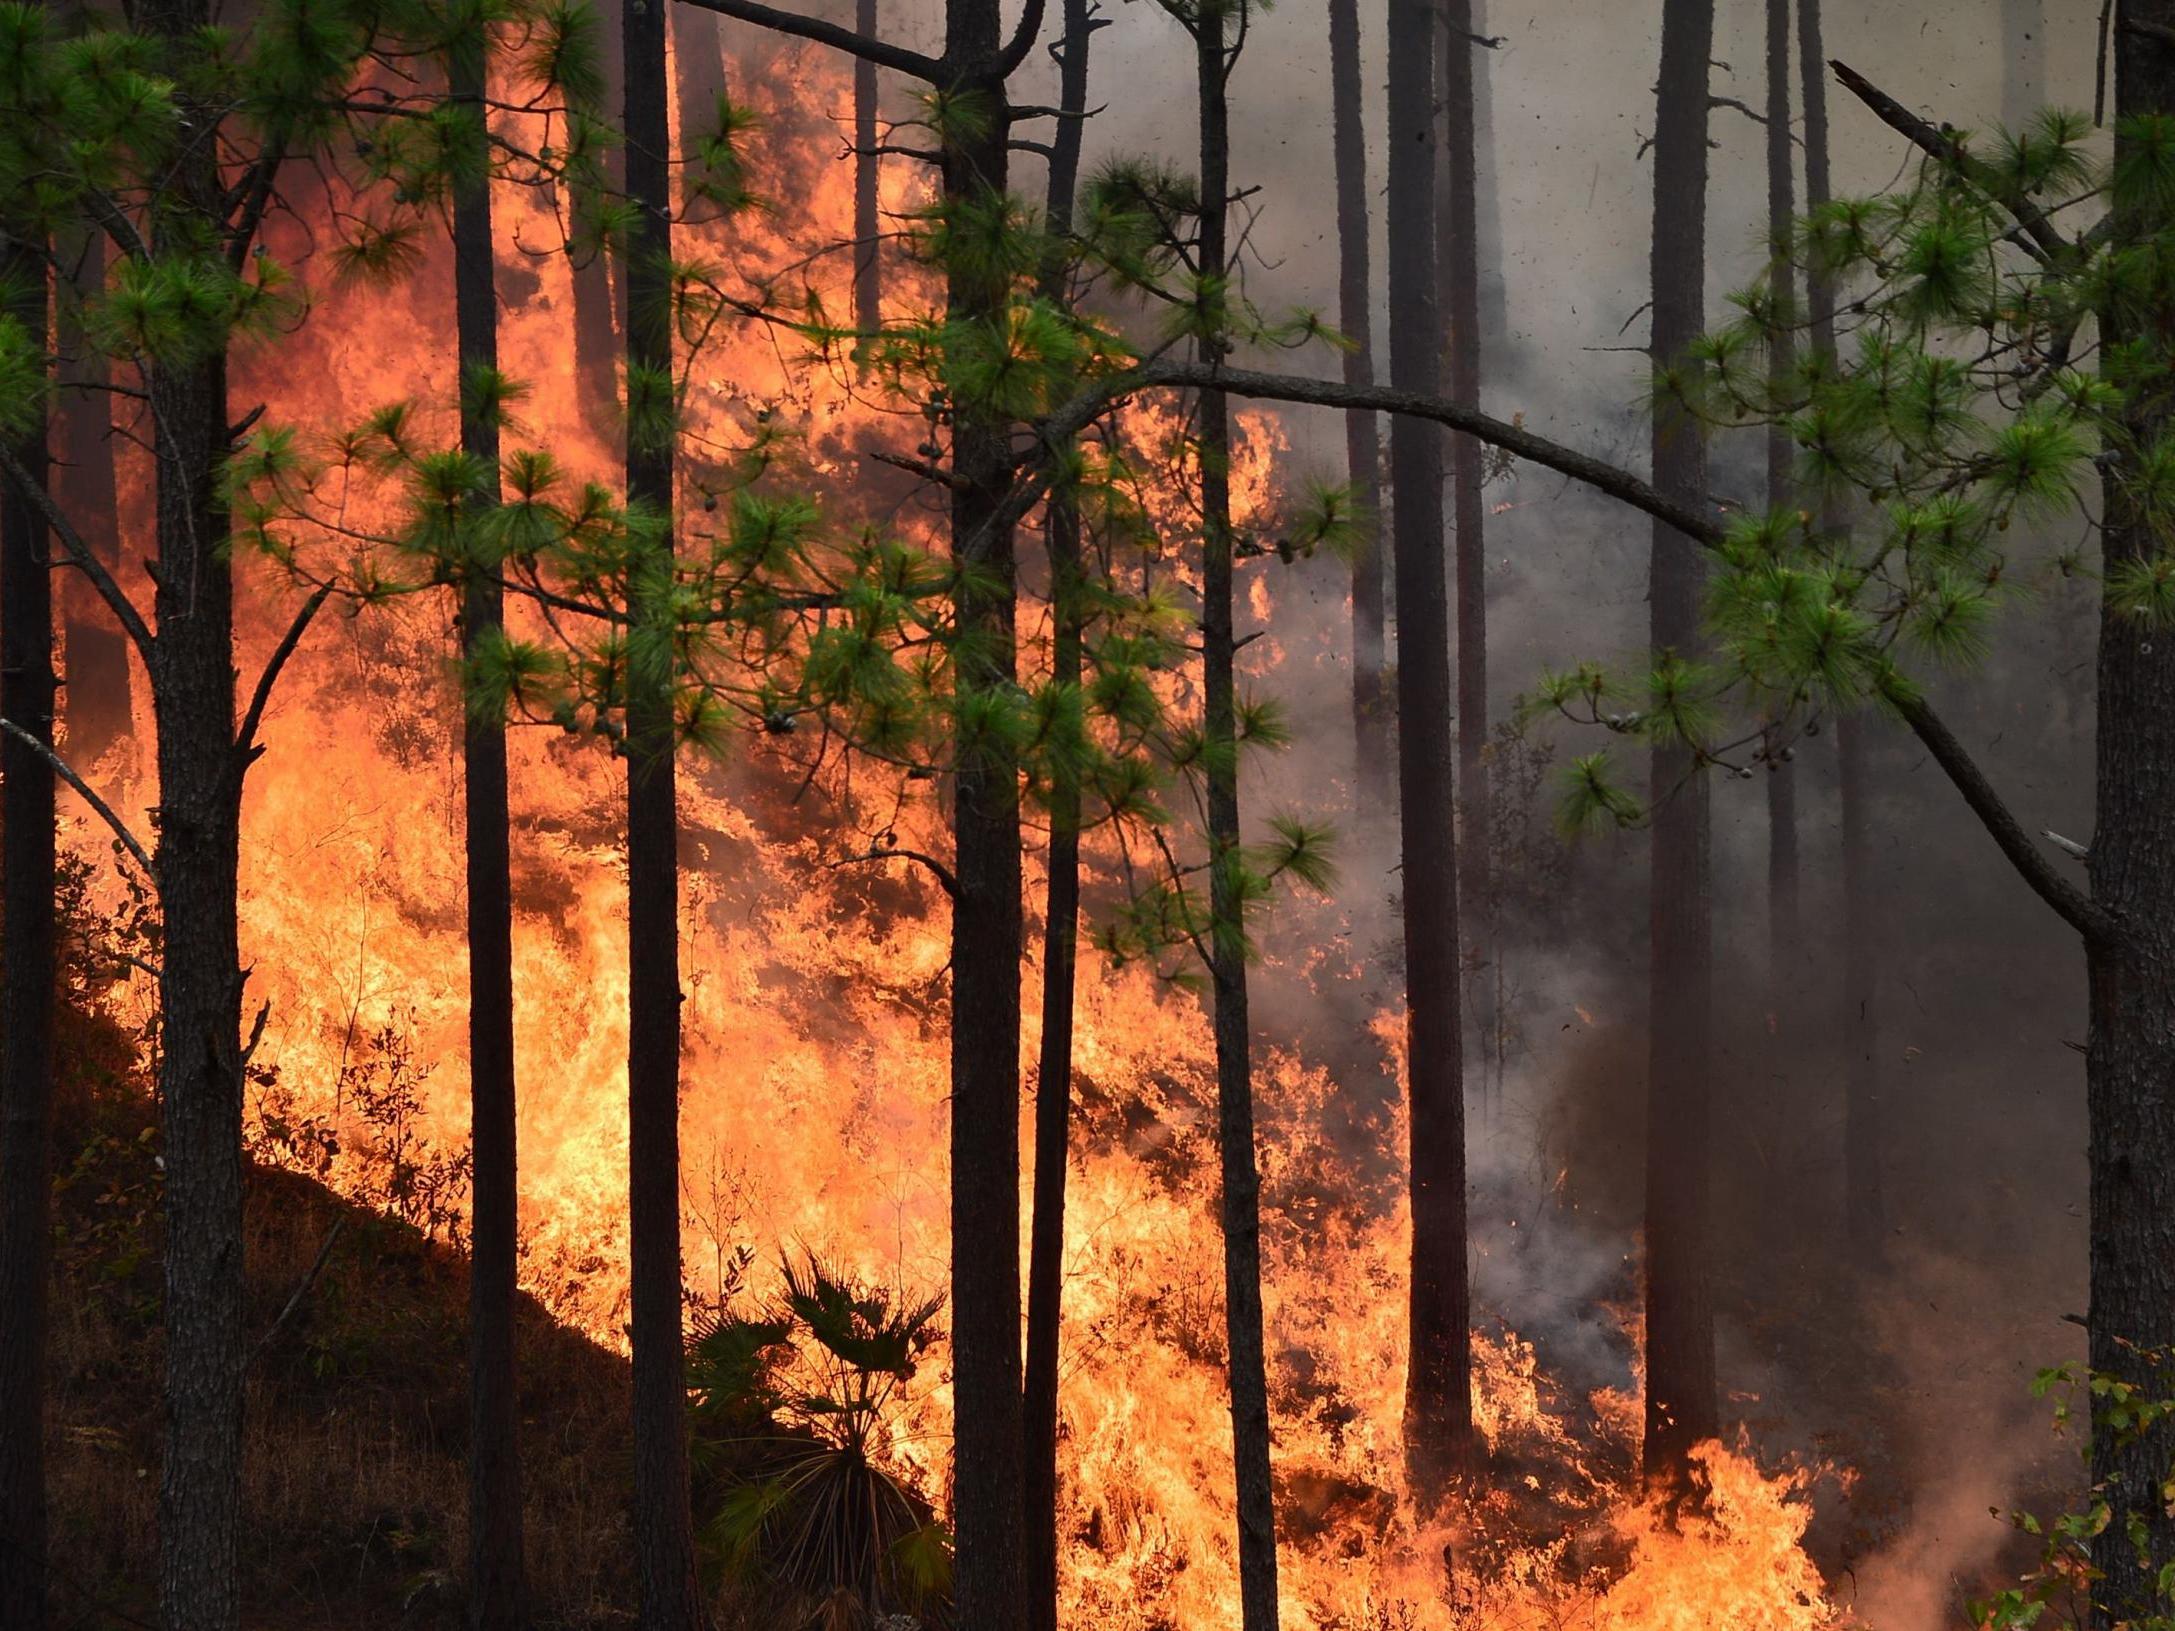 Rising global temperatures are causing ever more wildfires, which destroy forests and in turn exacerbate climate change